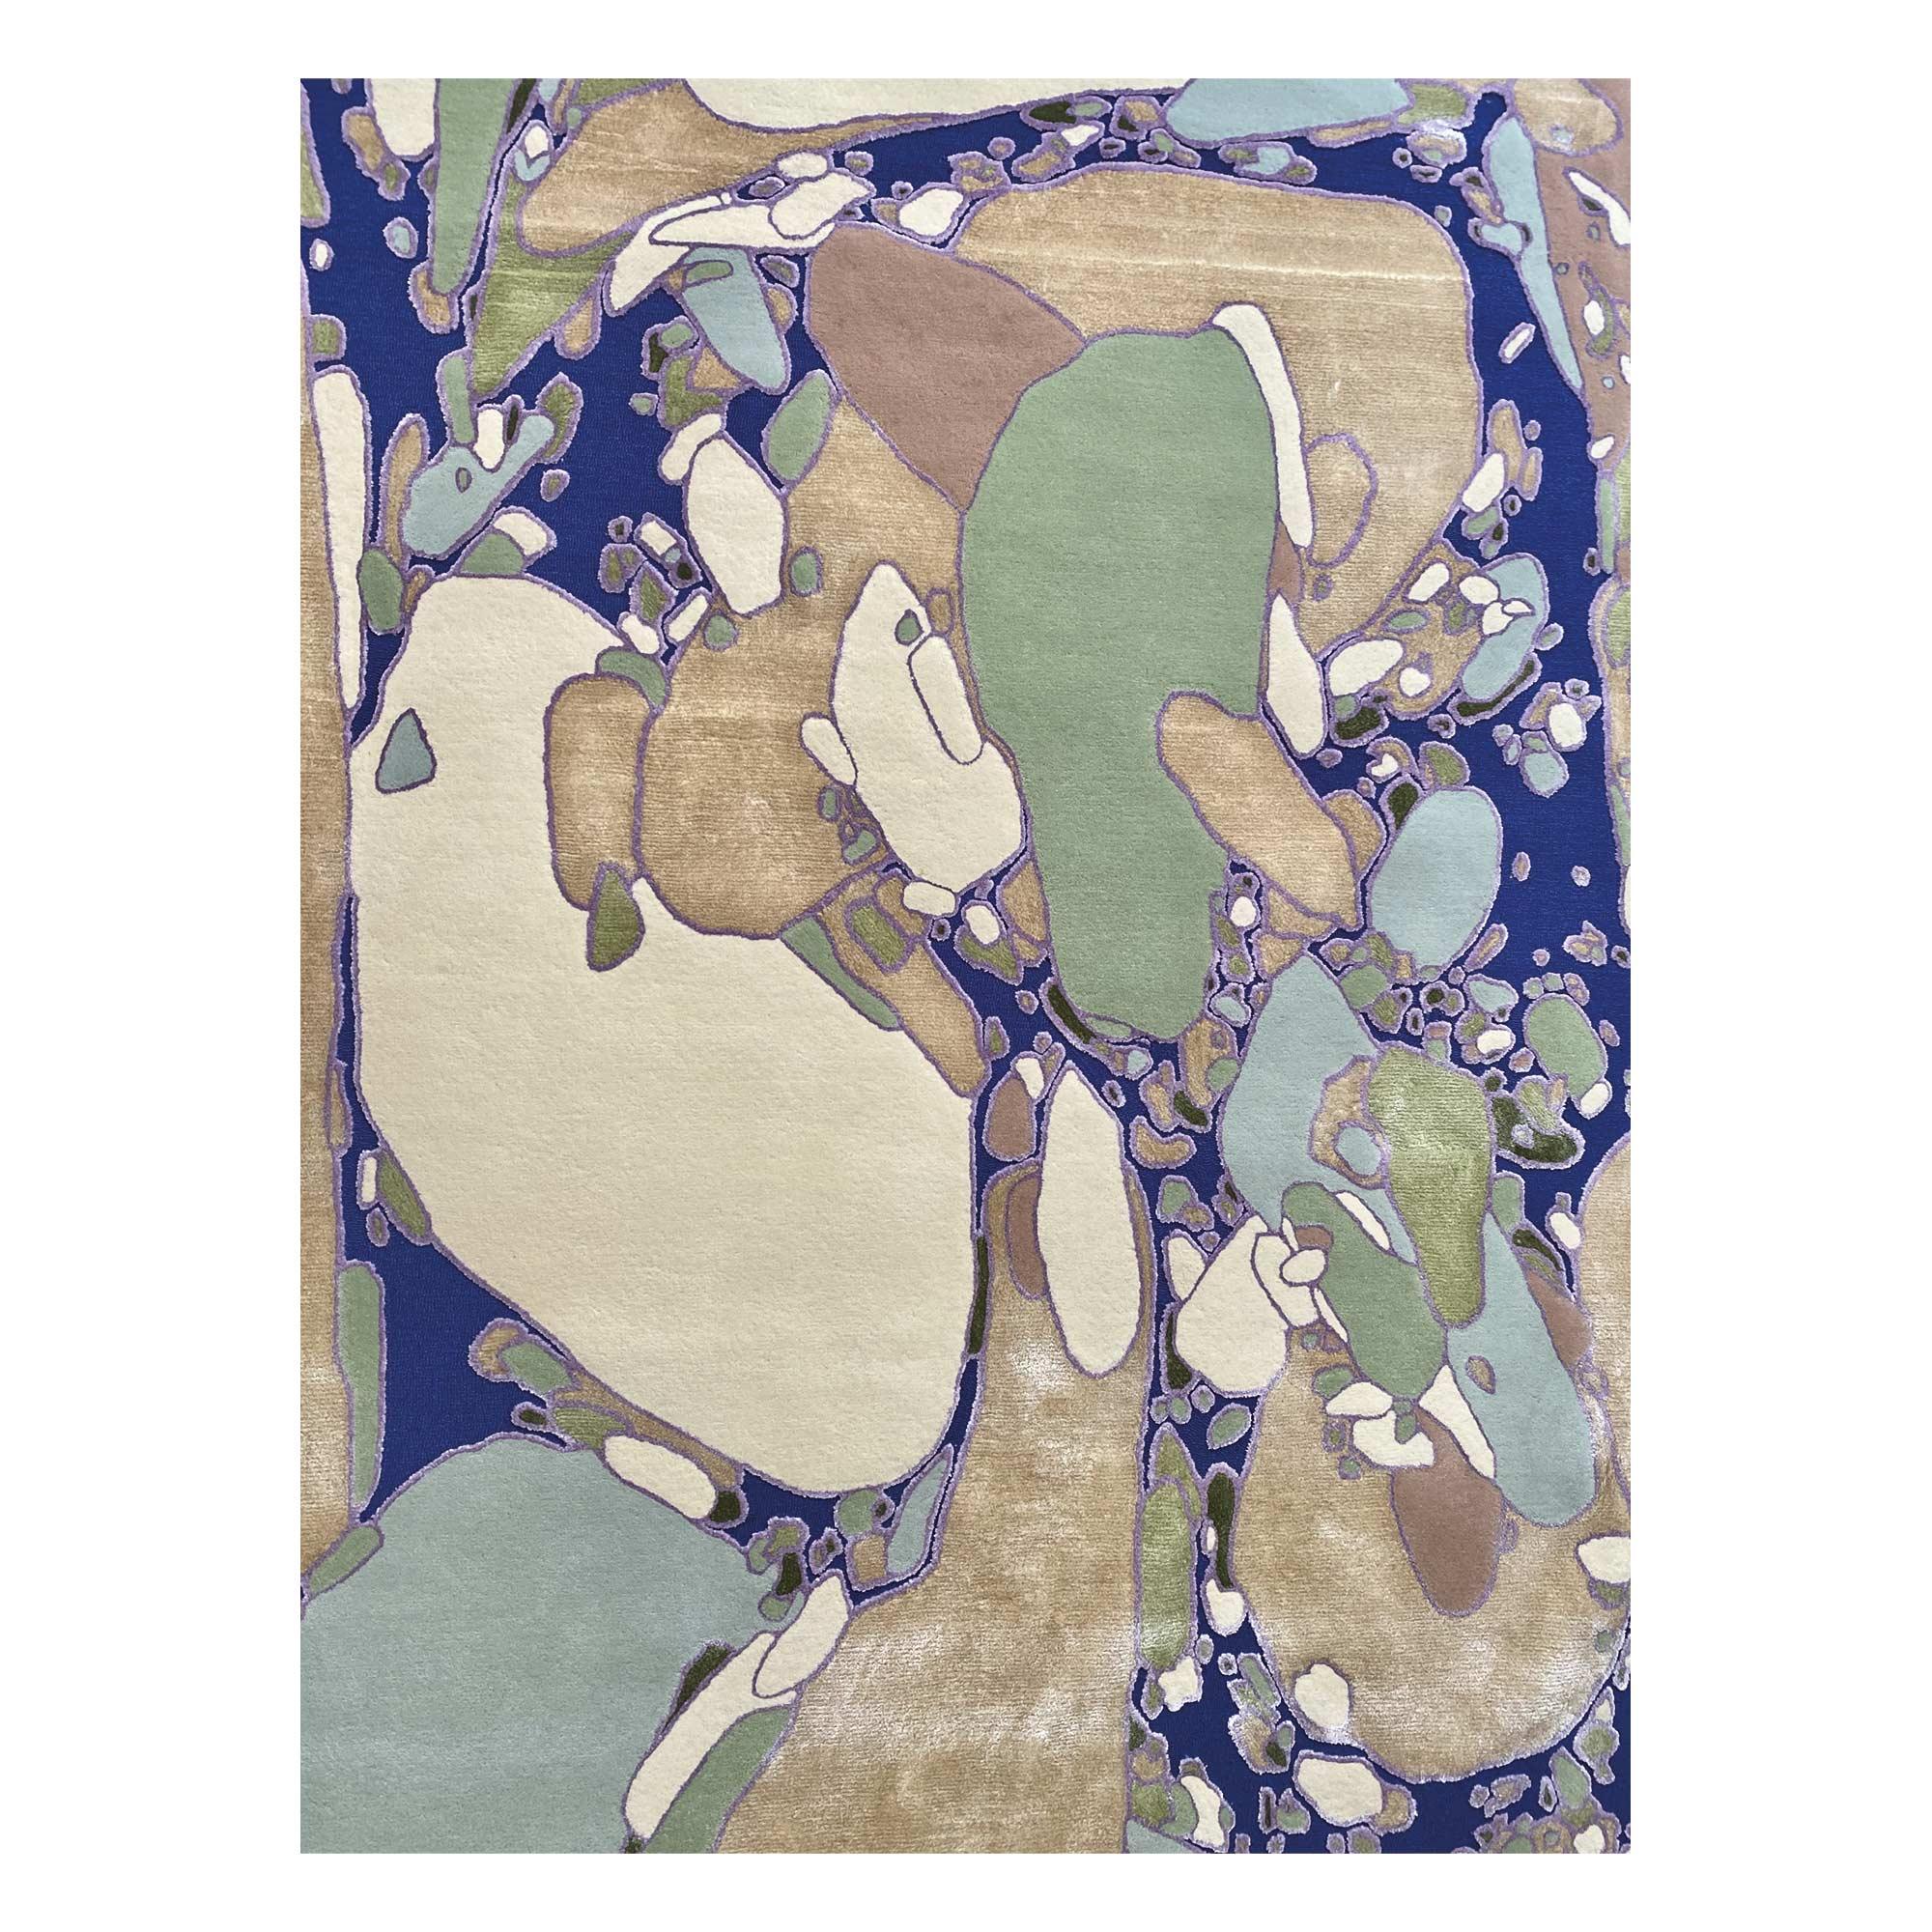 Jardin de Rocaille N°2 Rug by Clément Vuillier 
Dimensions: D 240 x W 170 cm 
Materials: New Zealand wool and viscose. 
Also available in other colors, designs, and dimensions.

Jardin de Rocaille is a collection of seven pieces, reinterpreted